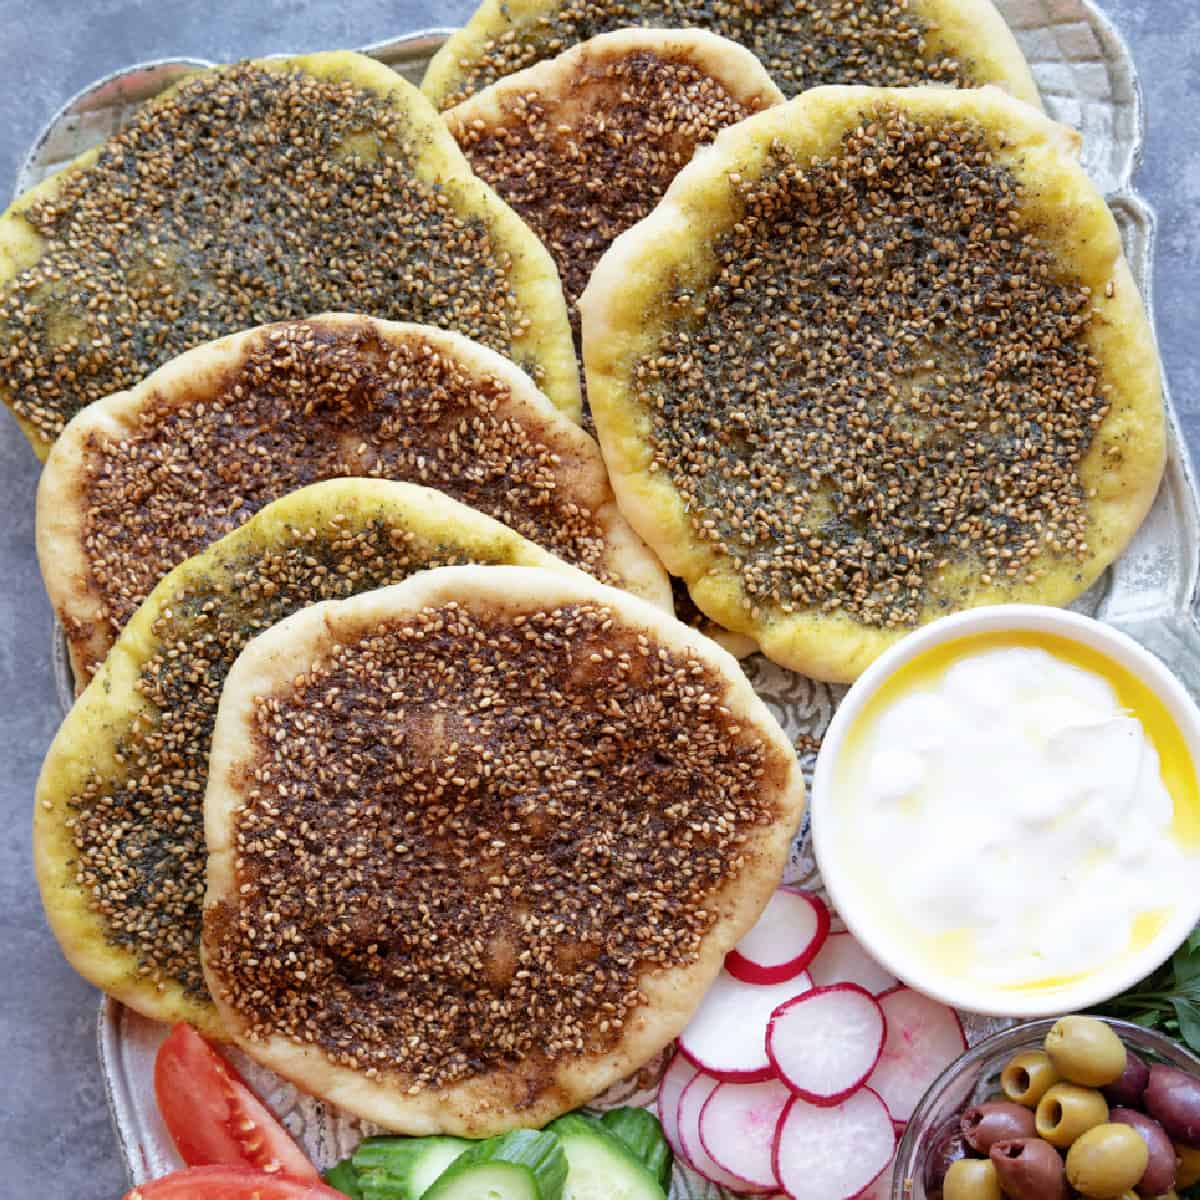 Manakish zaatar is a delicious Middle Eastern flatbread topped with zaatar. Learn how to make this delicious zaatar bread from scratch with just a few ingredients. 
